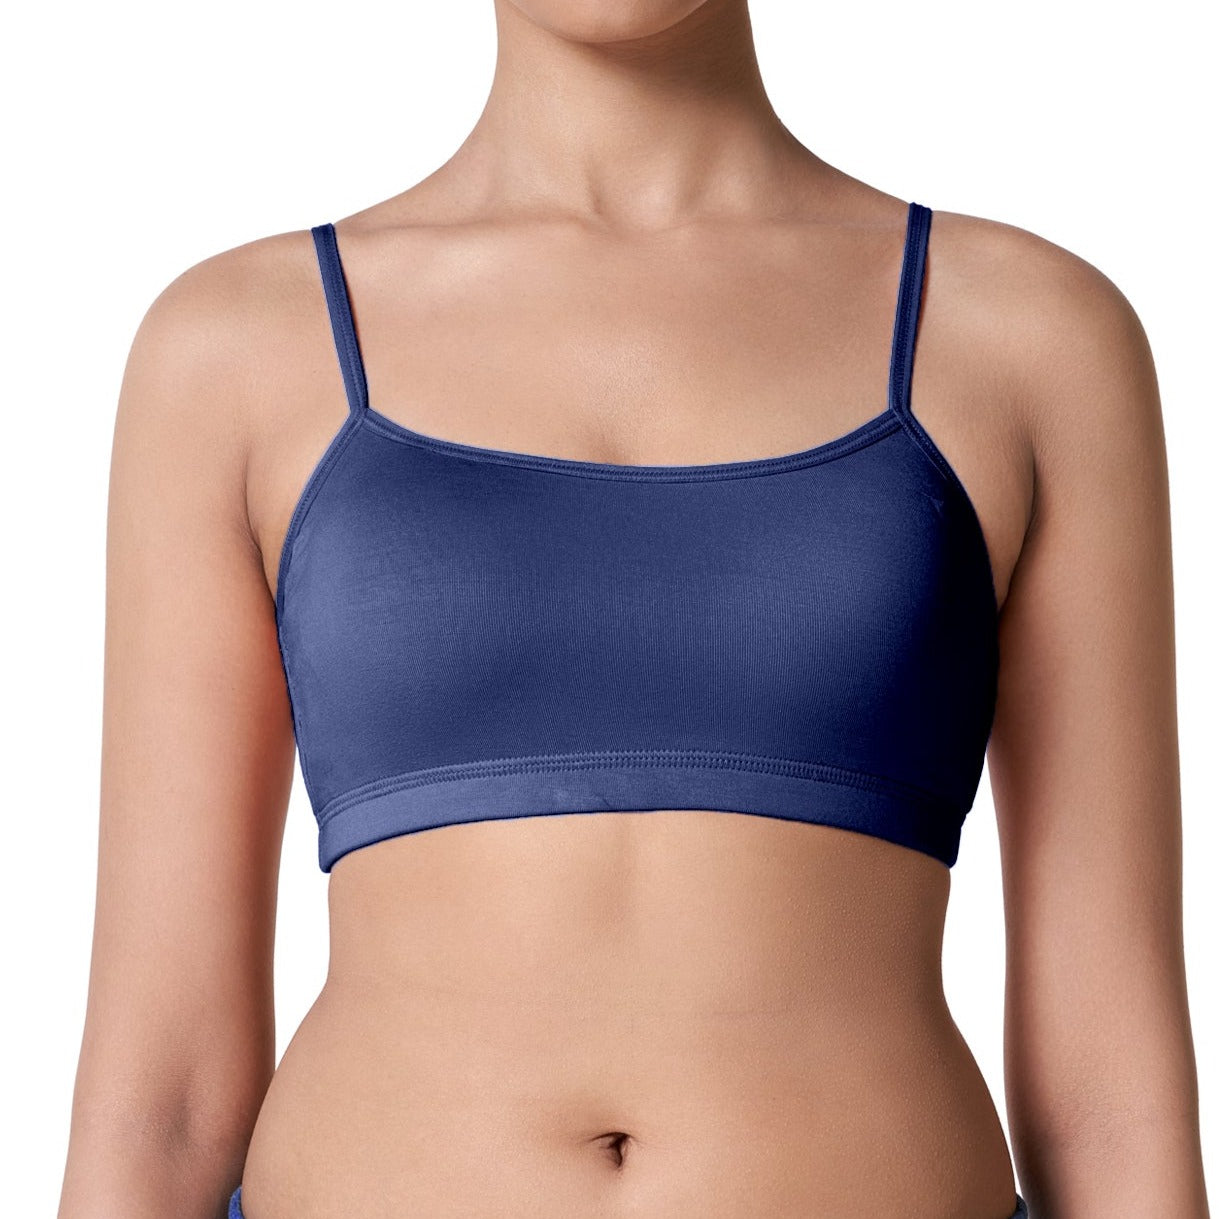 blossom-starters bra-navy blue3-teen collection